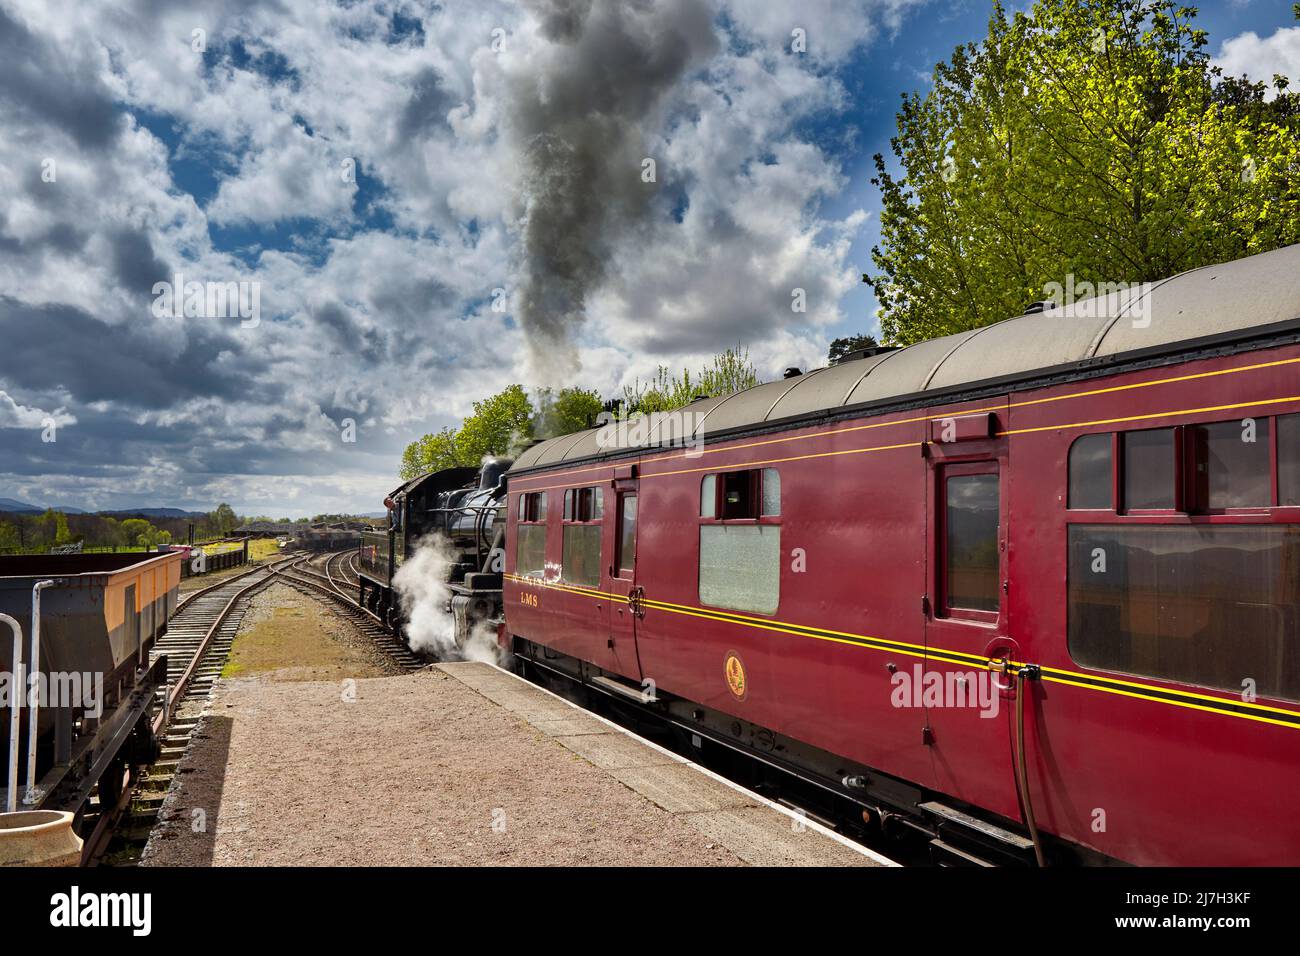 STRATHSPEY RAILWAY BROOMHILL STATION SCOTLAND THE STEAM TRAIN LEAVING THE PLATFORM A PLUME OF SMOKE FROM THE FUNNEL OR SMOKESTACK Stock Photo